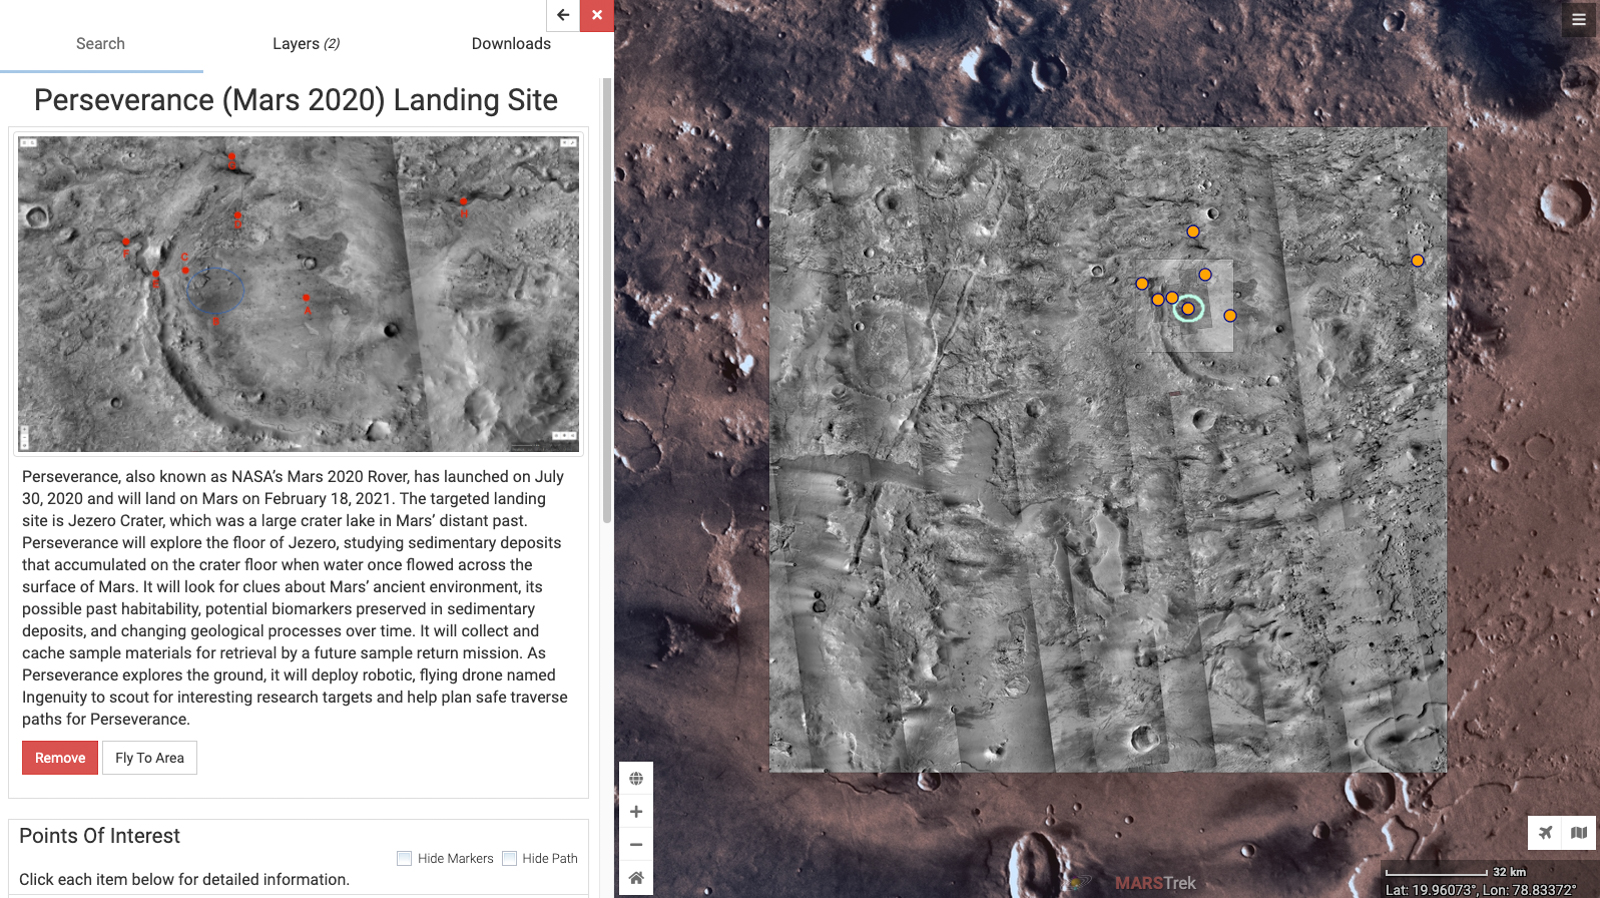 Screengrab of Mars Trek showing the Data window expanded with information about the Perseverance landing site.